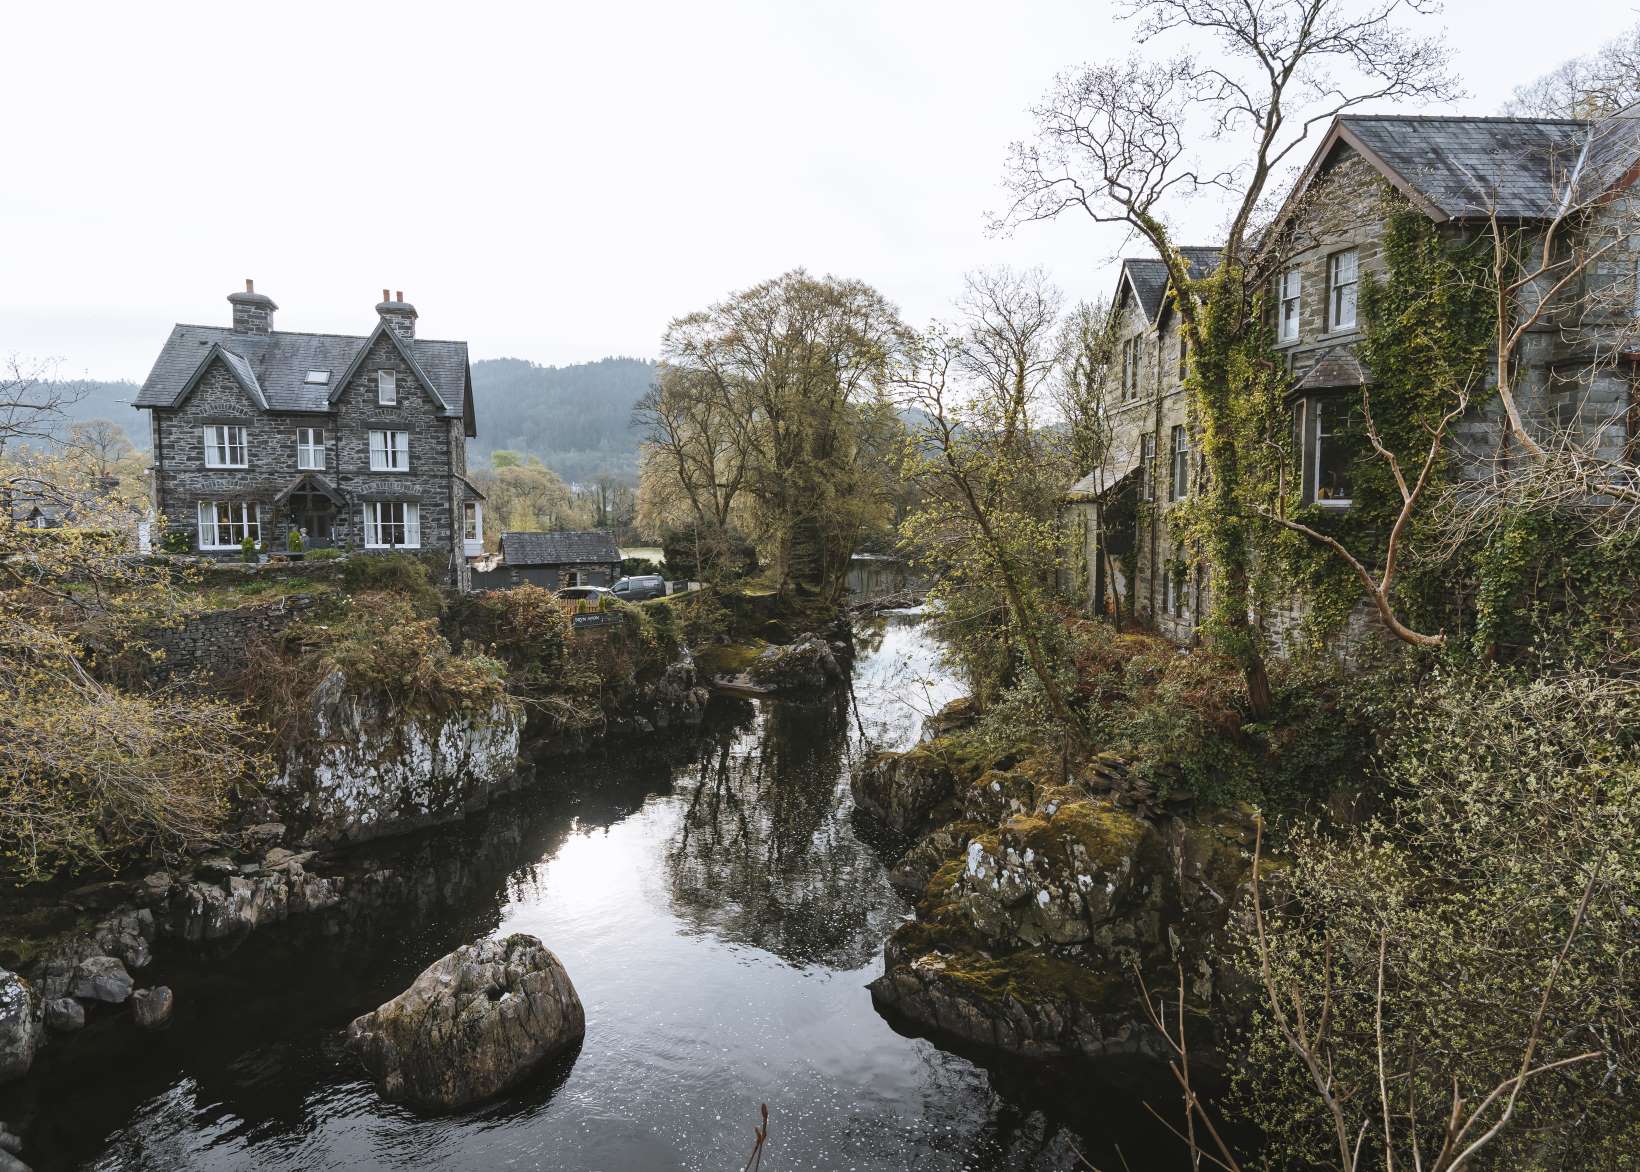 The Llugwy river runs through the village of Betws y Coed with stone houses on either side.